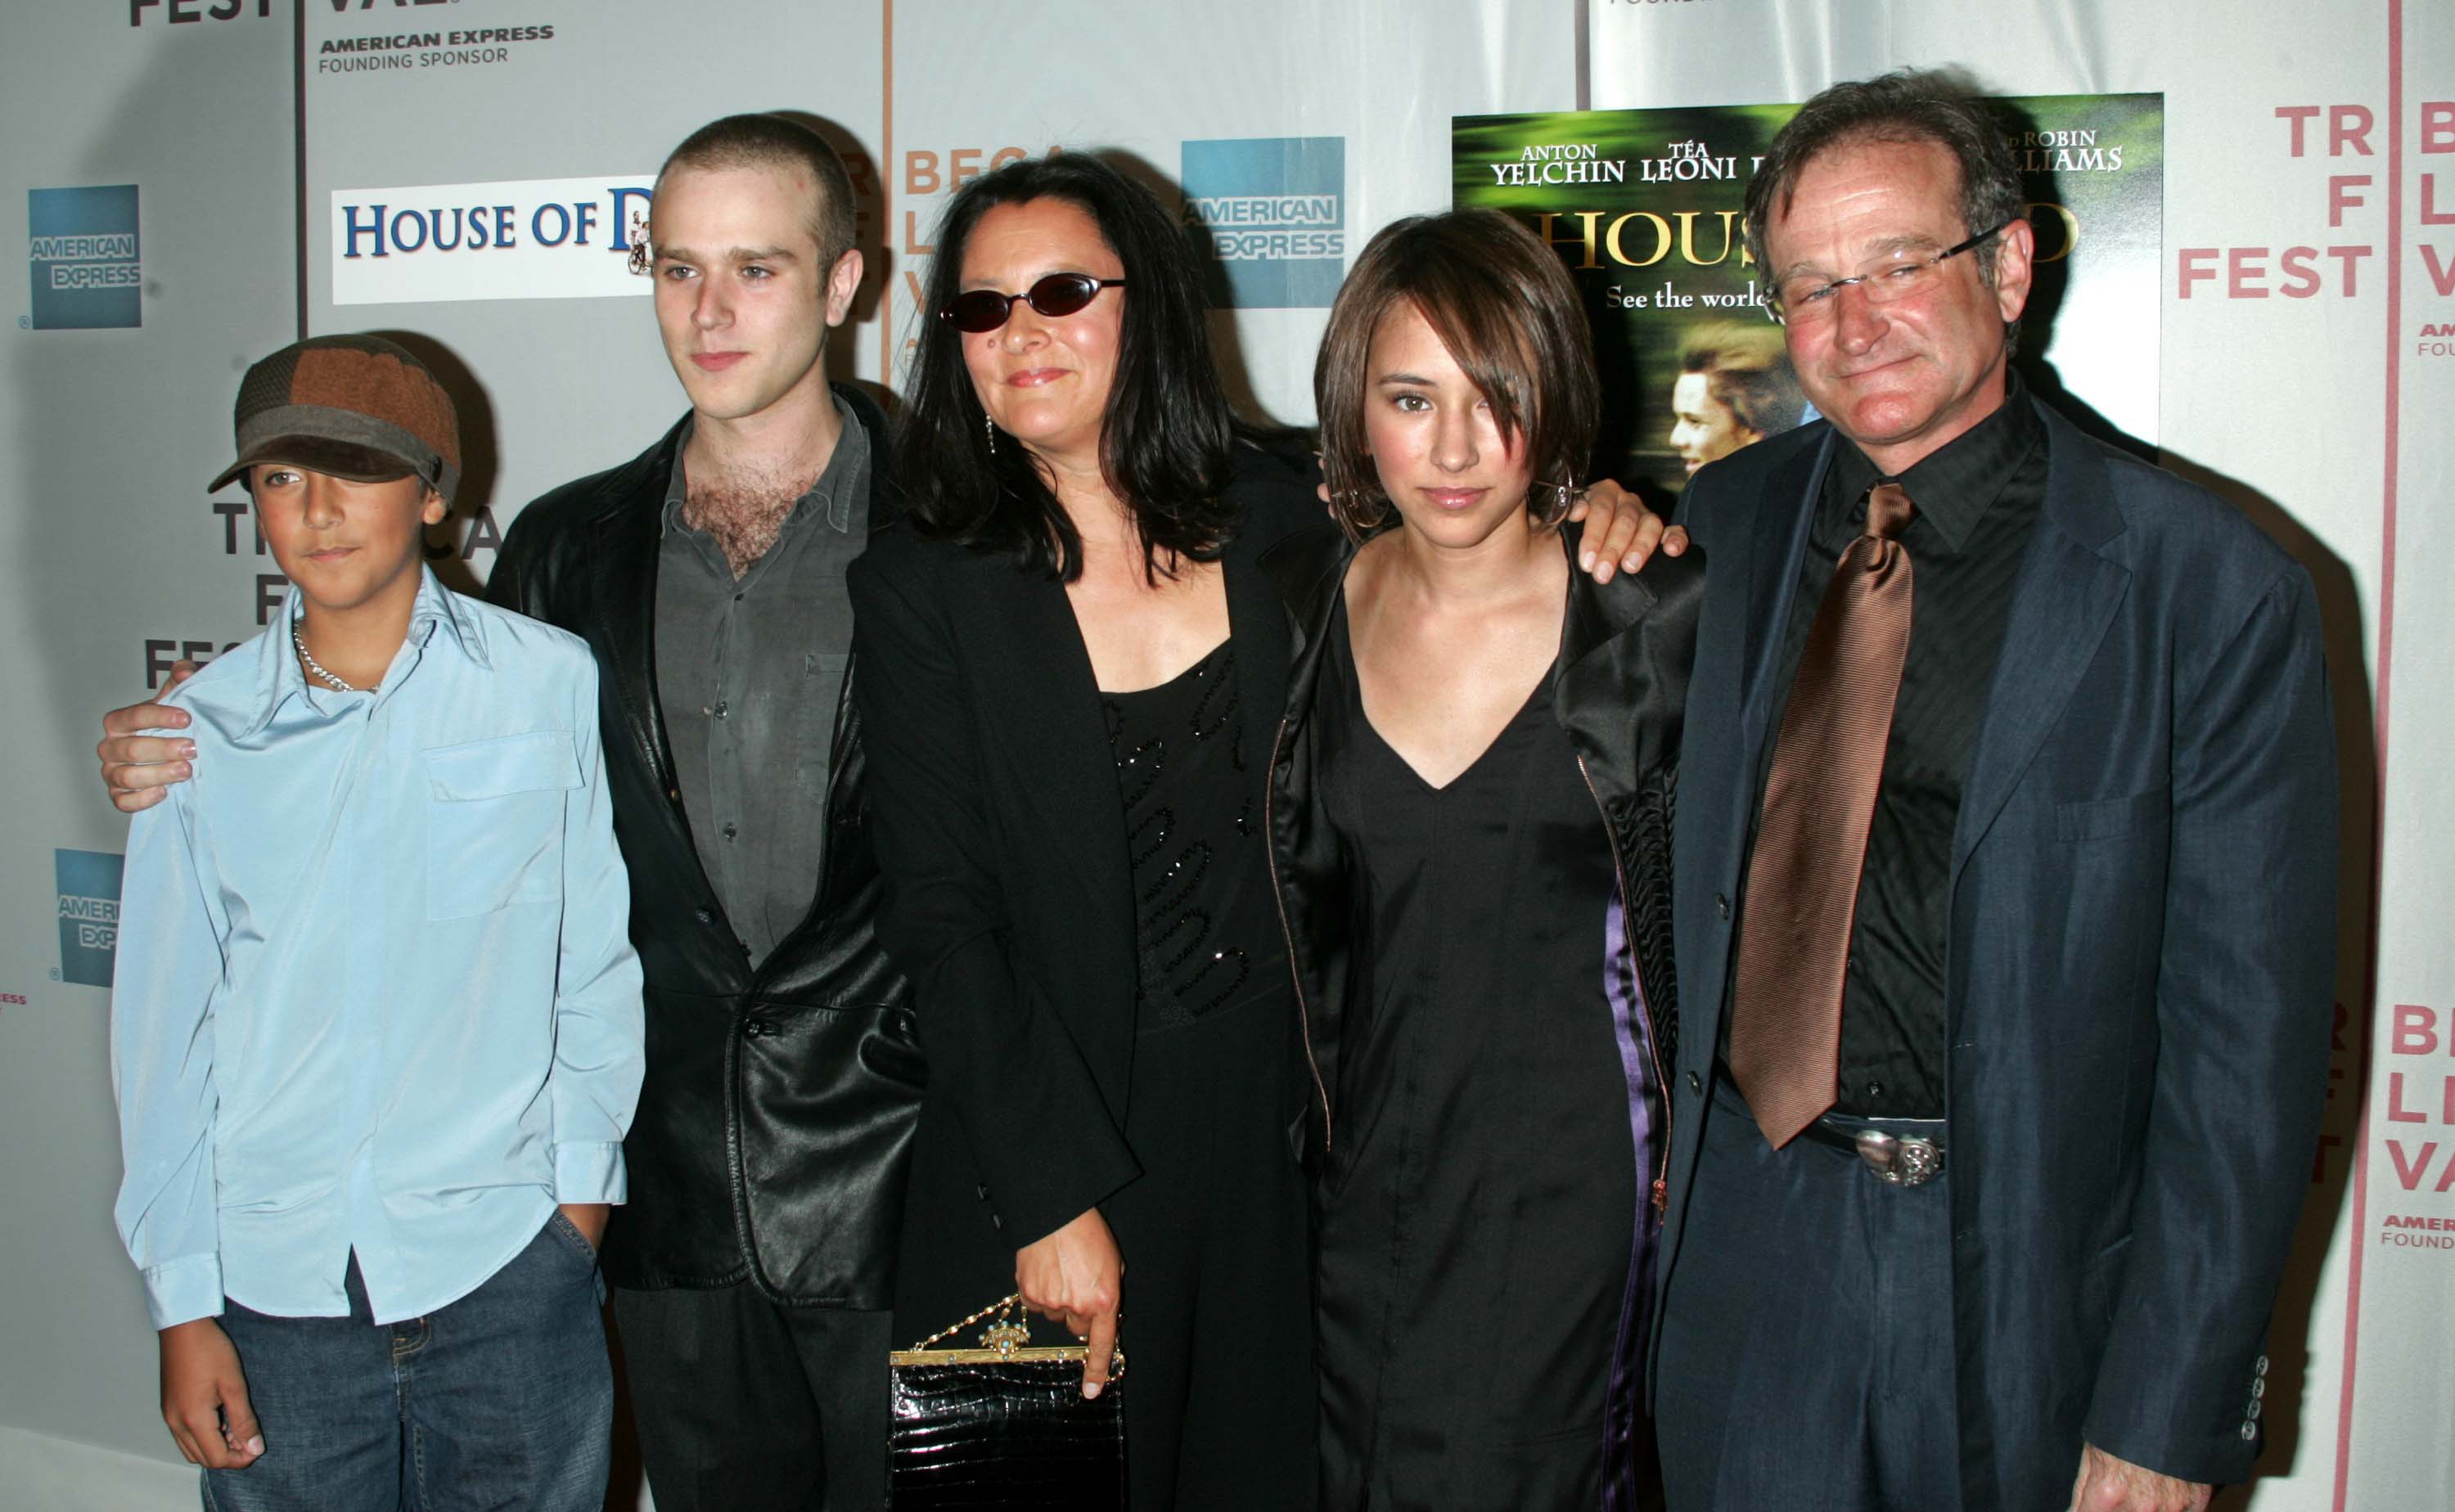 Cody, Zak, Marsha, Zelda, and Robin Williams at the 3rd Annual Tribeca Film Festival - "House of D"- premiere in New York City, on May 7, 2004 | Source: Getty Images